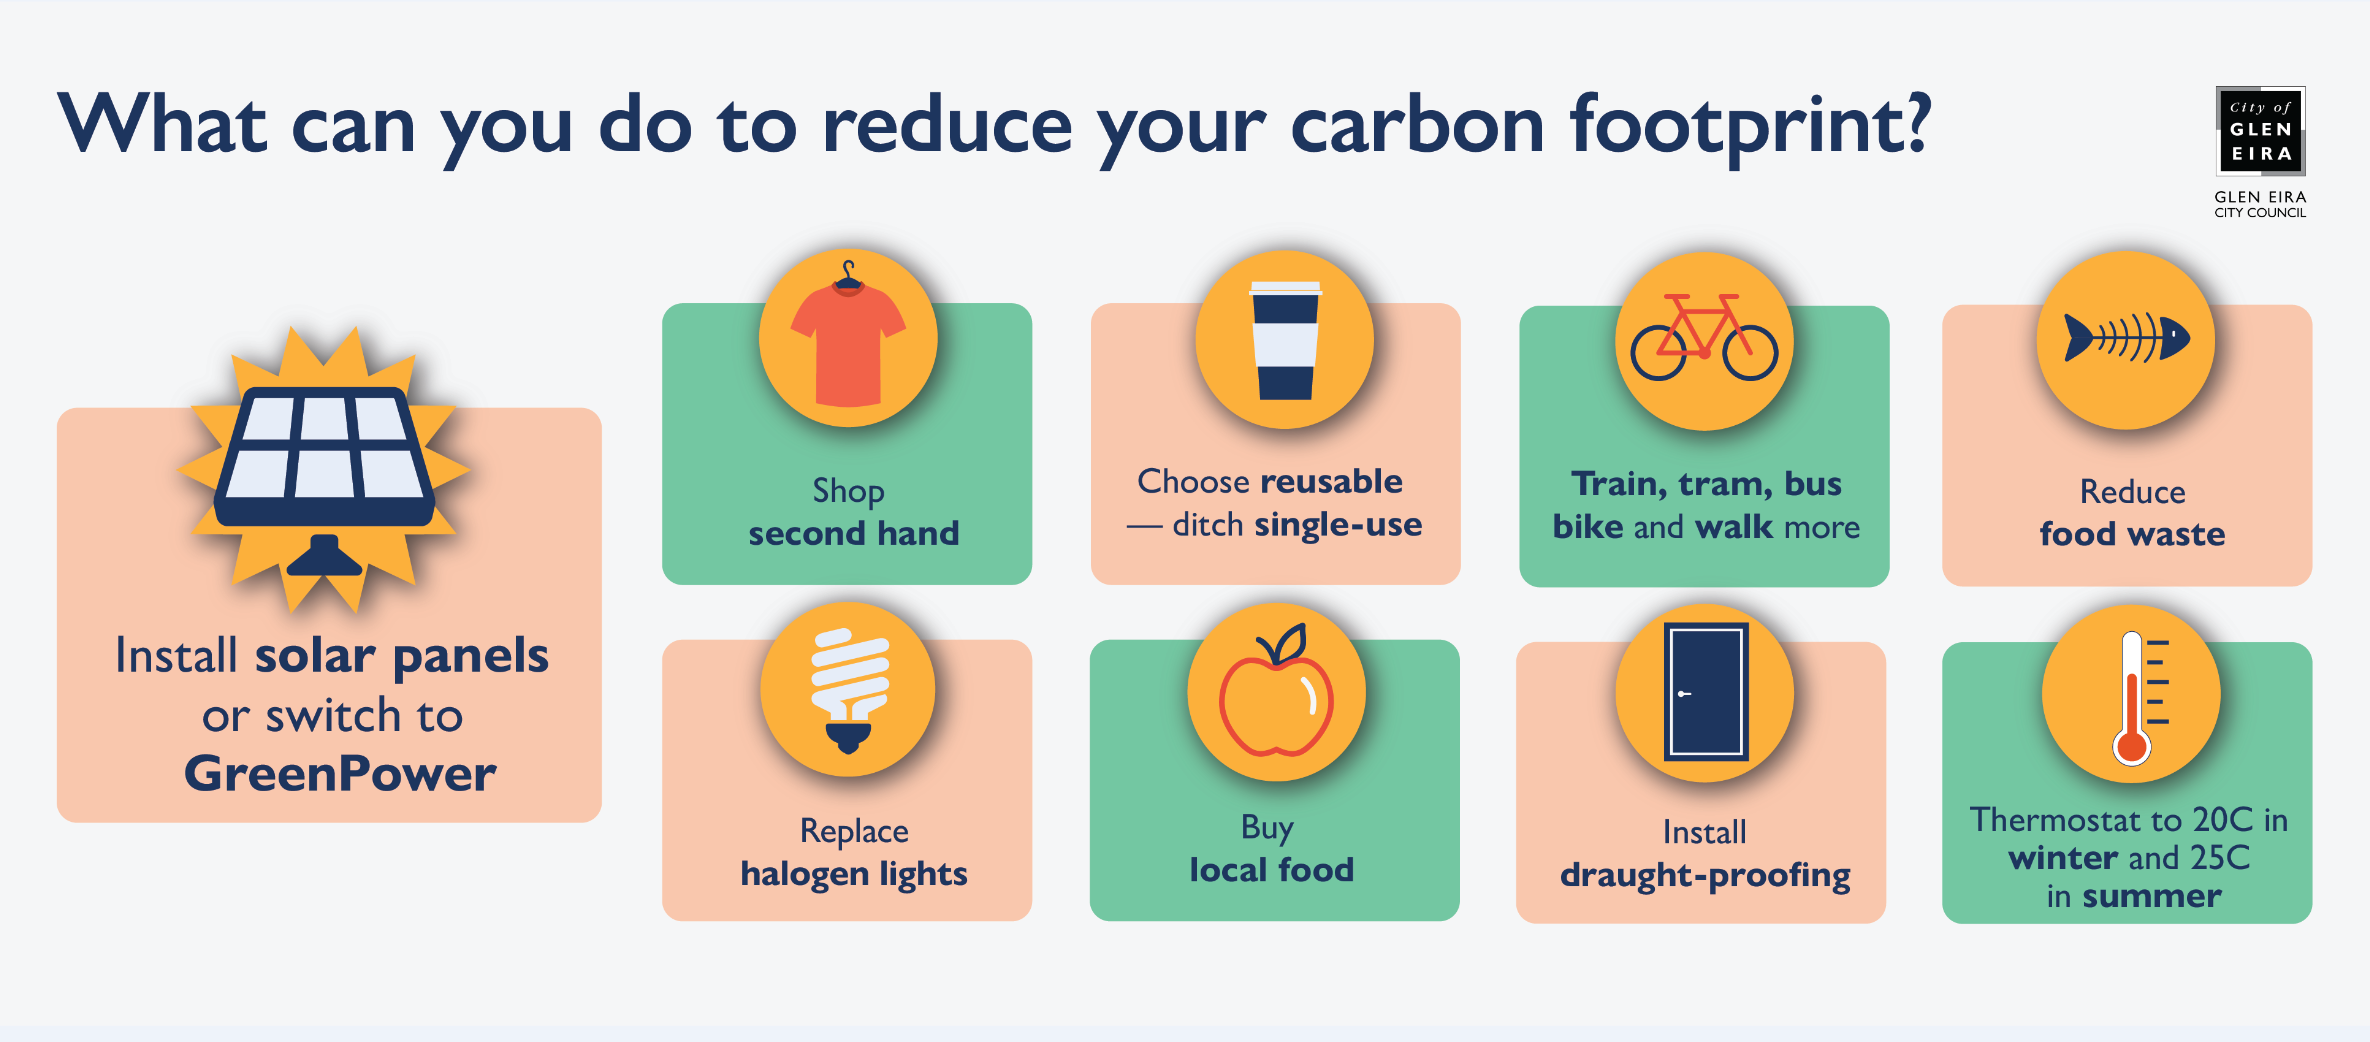 What can I do to reduce my carbon footprint? | Glen Eira City Council